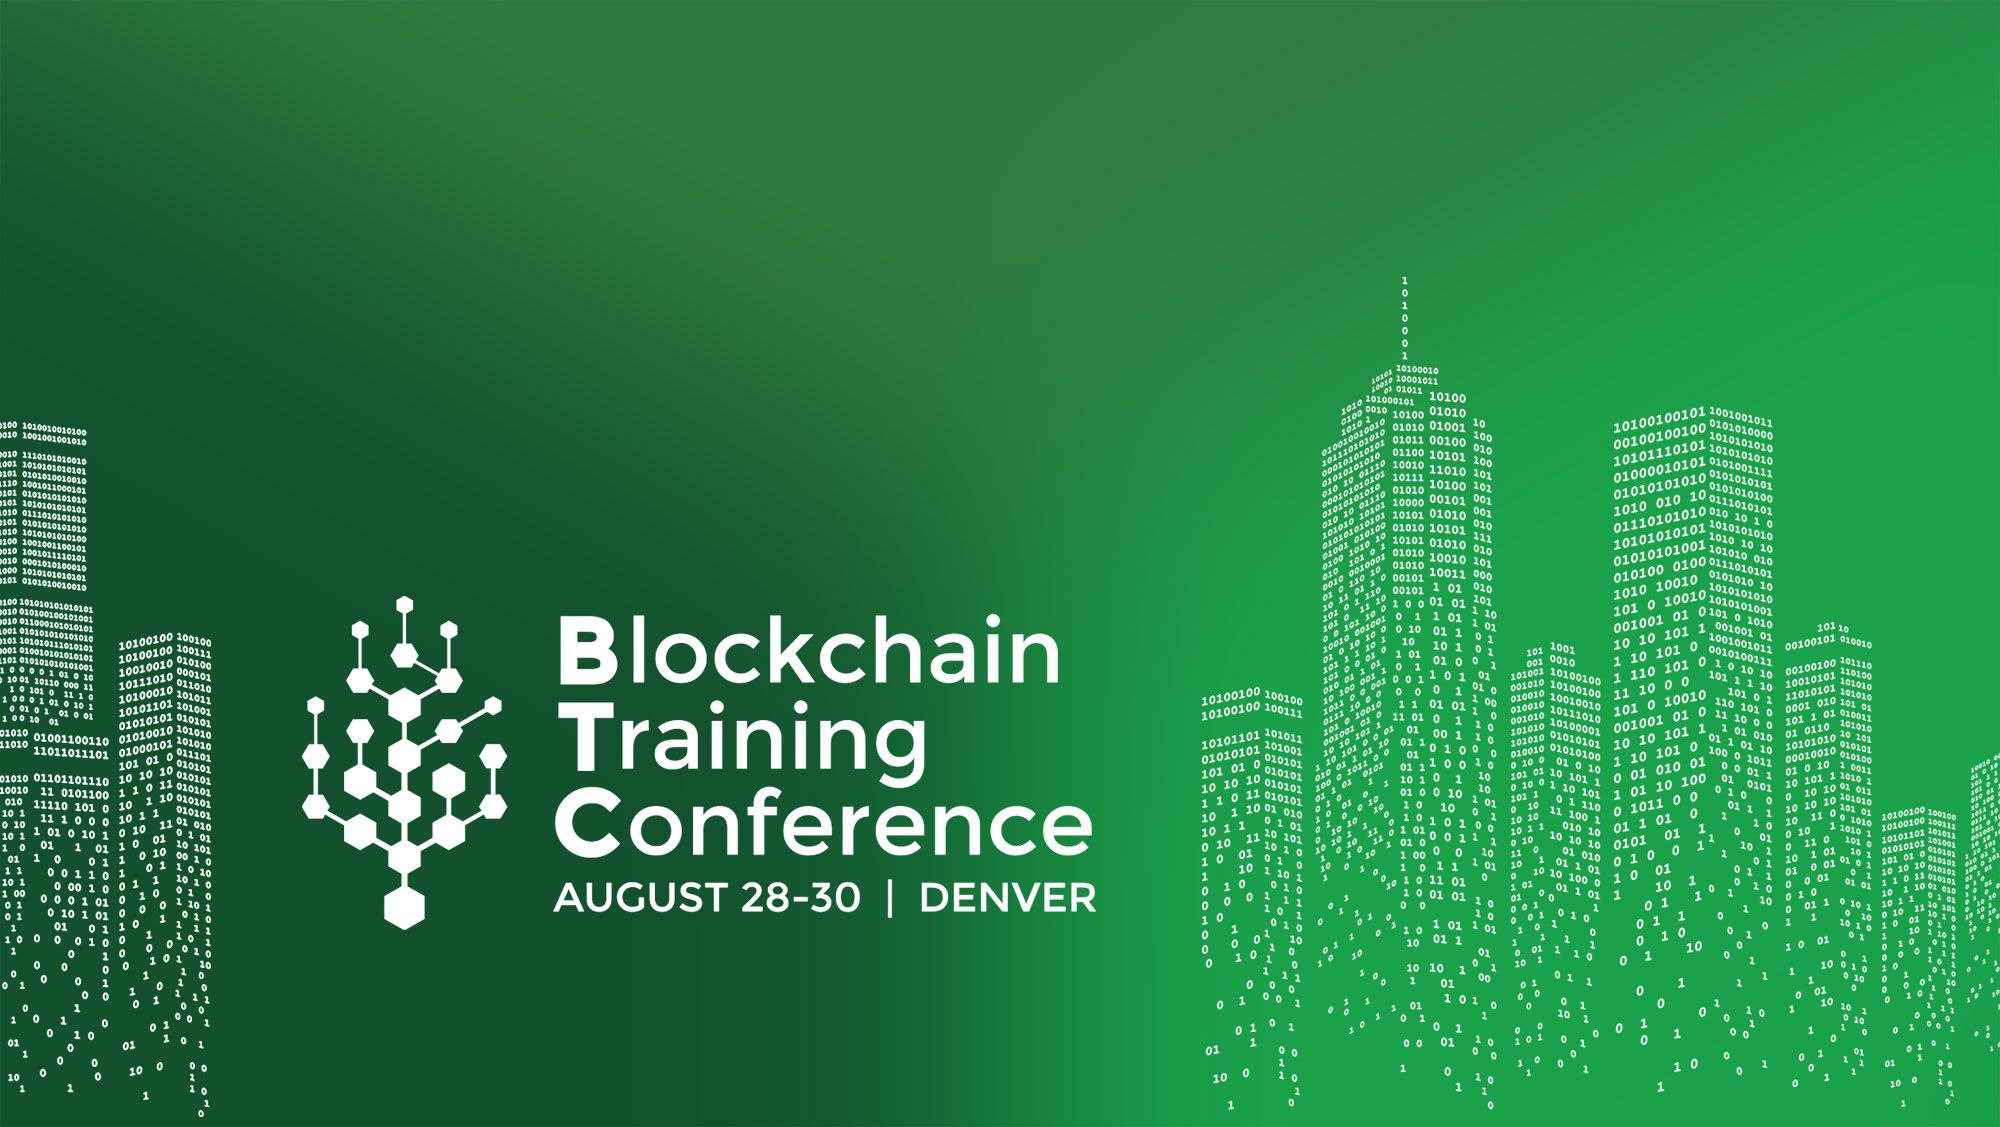 How to Pitch Your Boss to Send You to Blockchain Training Conference 2019